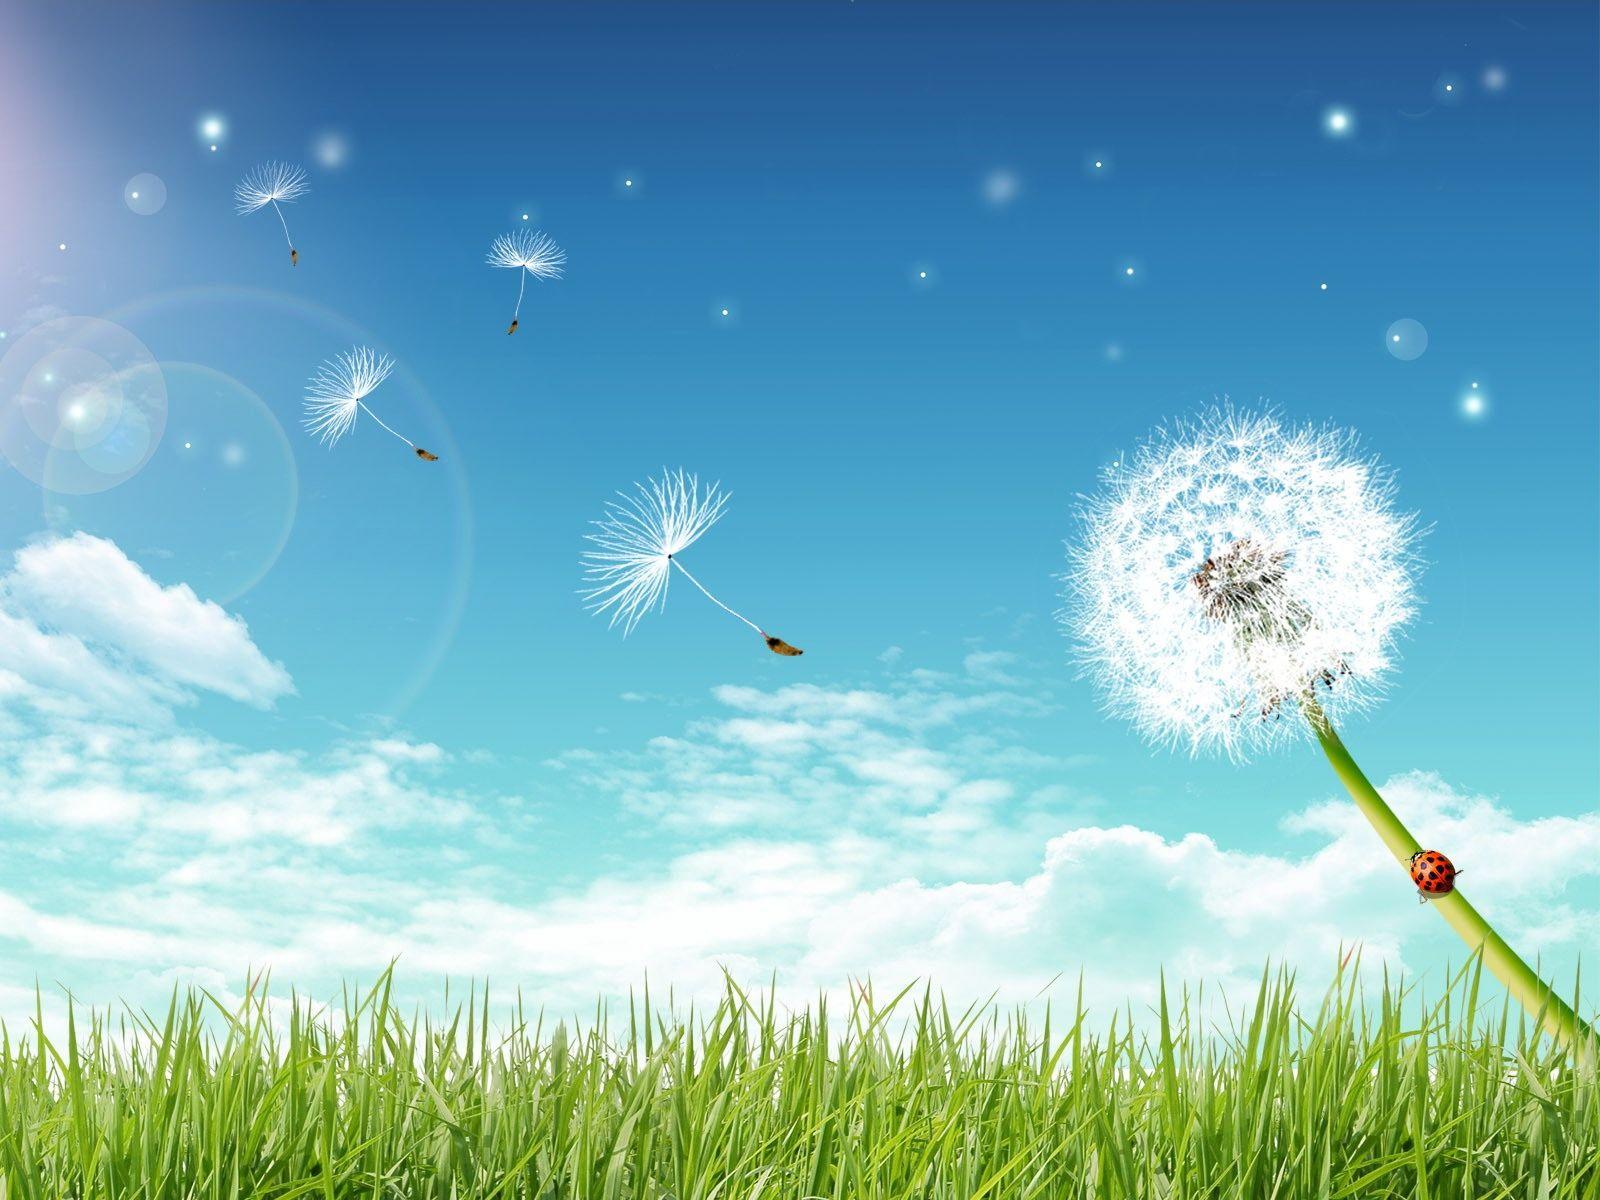 Dandelion: Getting Life in Balance. Earth Gifts: Healers and Messengers